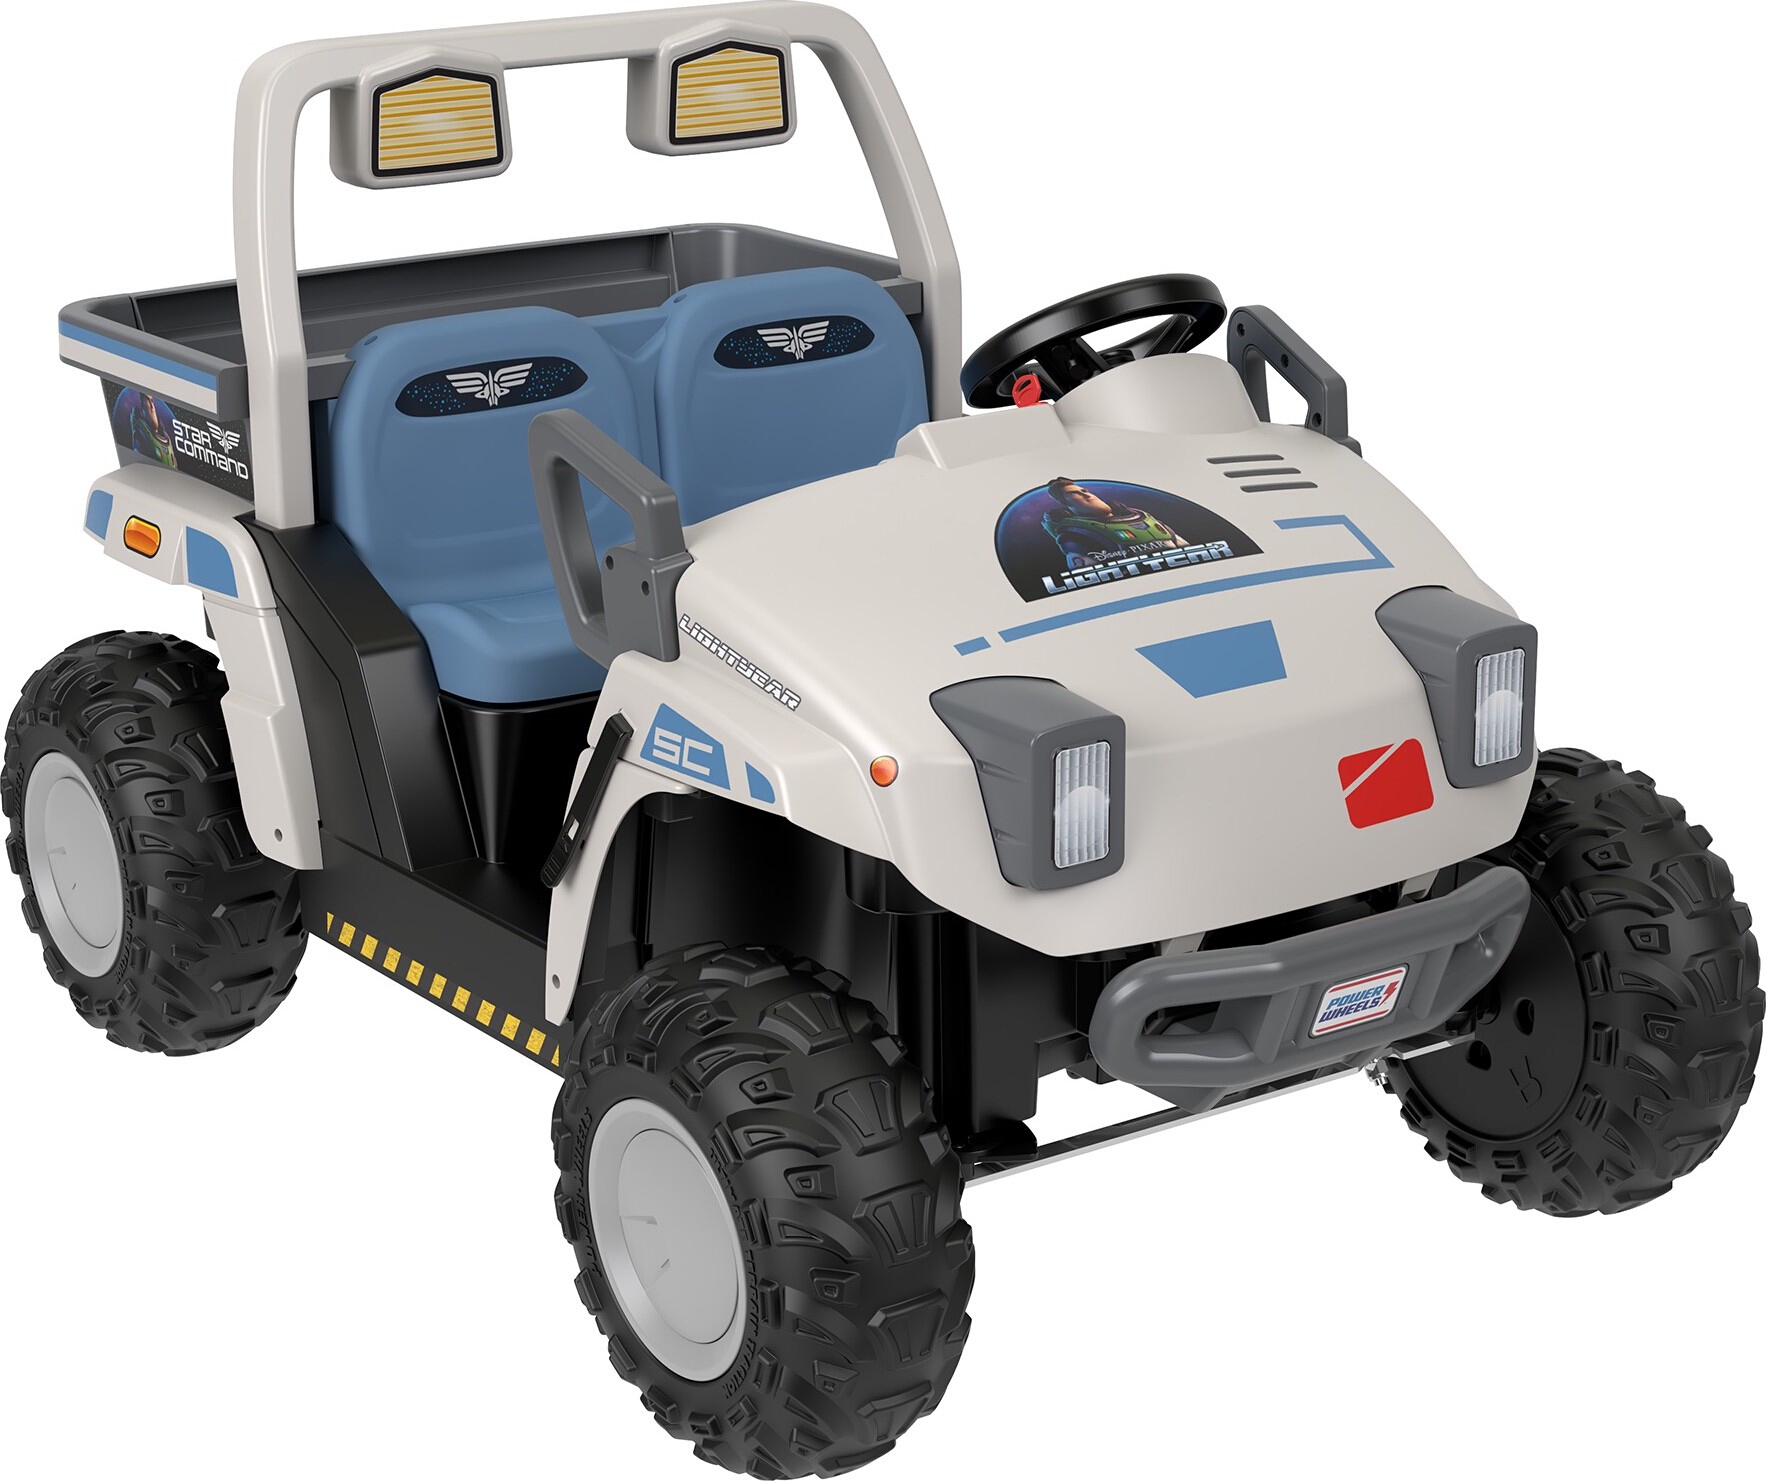 Power Wheels Disney and Pixar Lightyear Star Command Base Transport Ride-on, 12 V, Max Speed: 5 mph - image 1 of 7